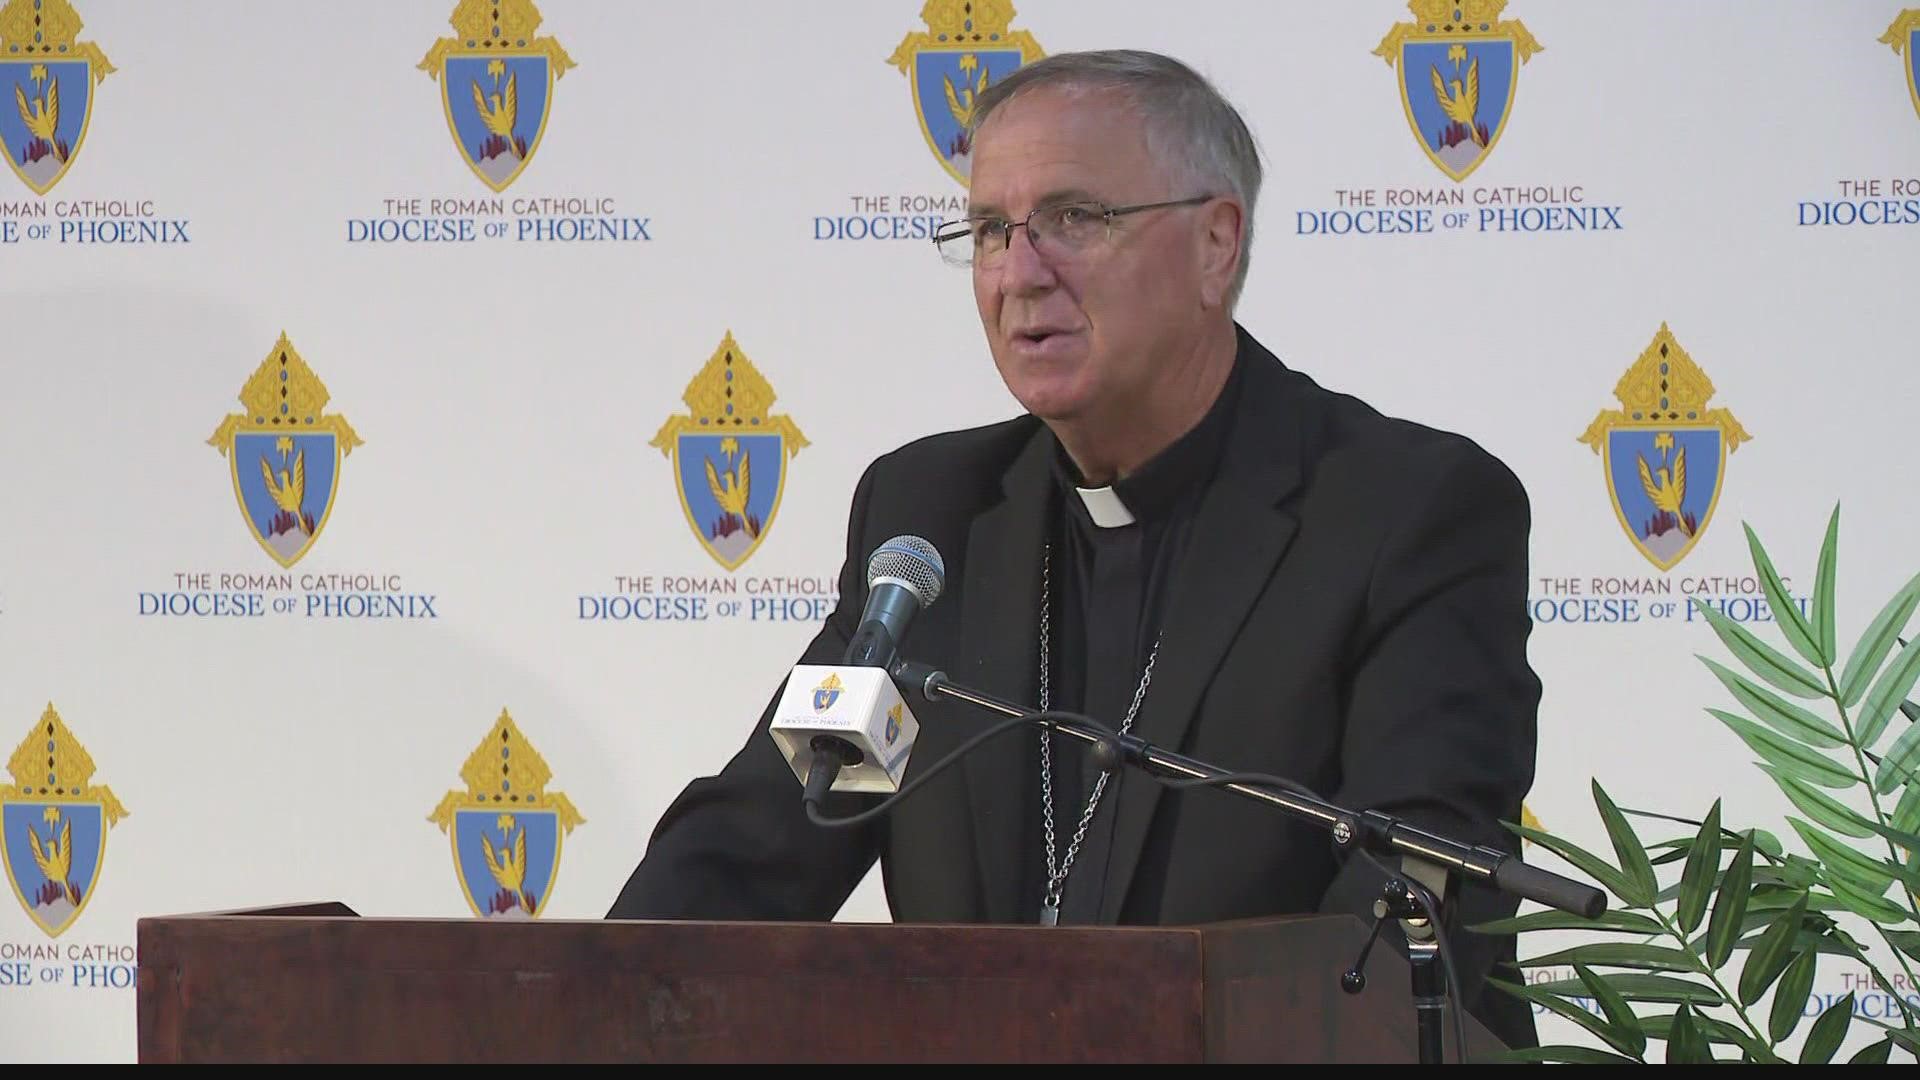 The new bishop, John Dolan, will oversee 94 parishes, 23 missions and 65 private schools and preschools around Arizona. Here's where Dolan stands on five key issues.